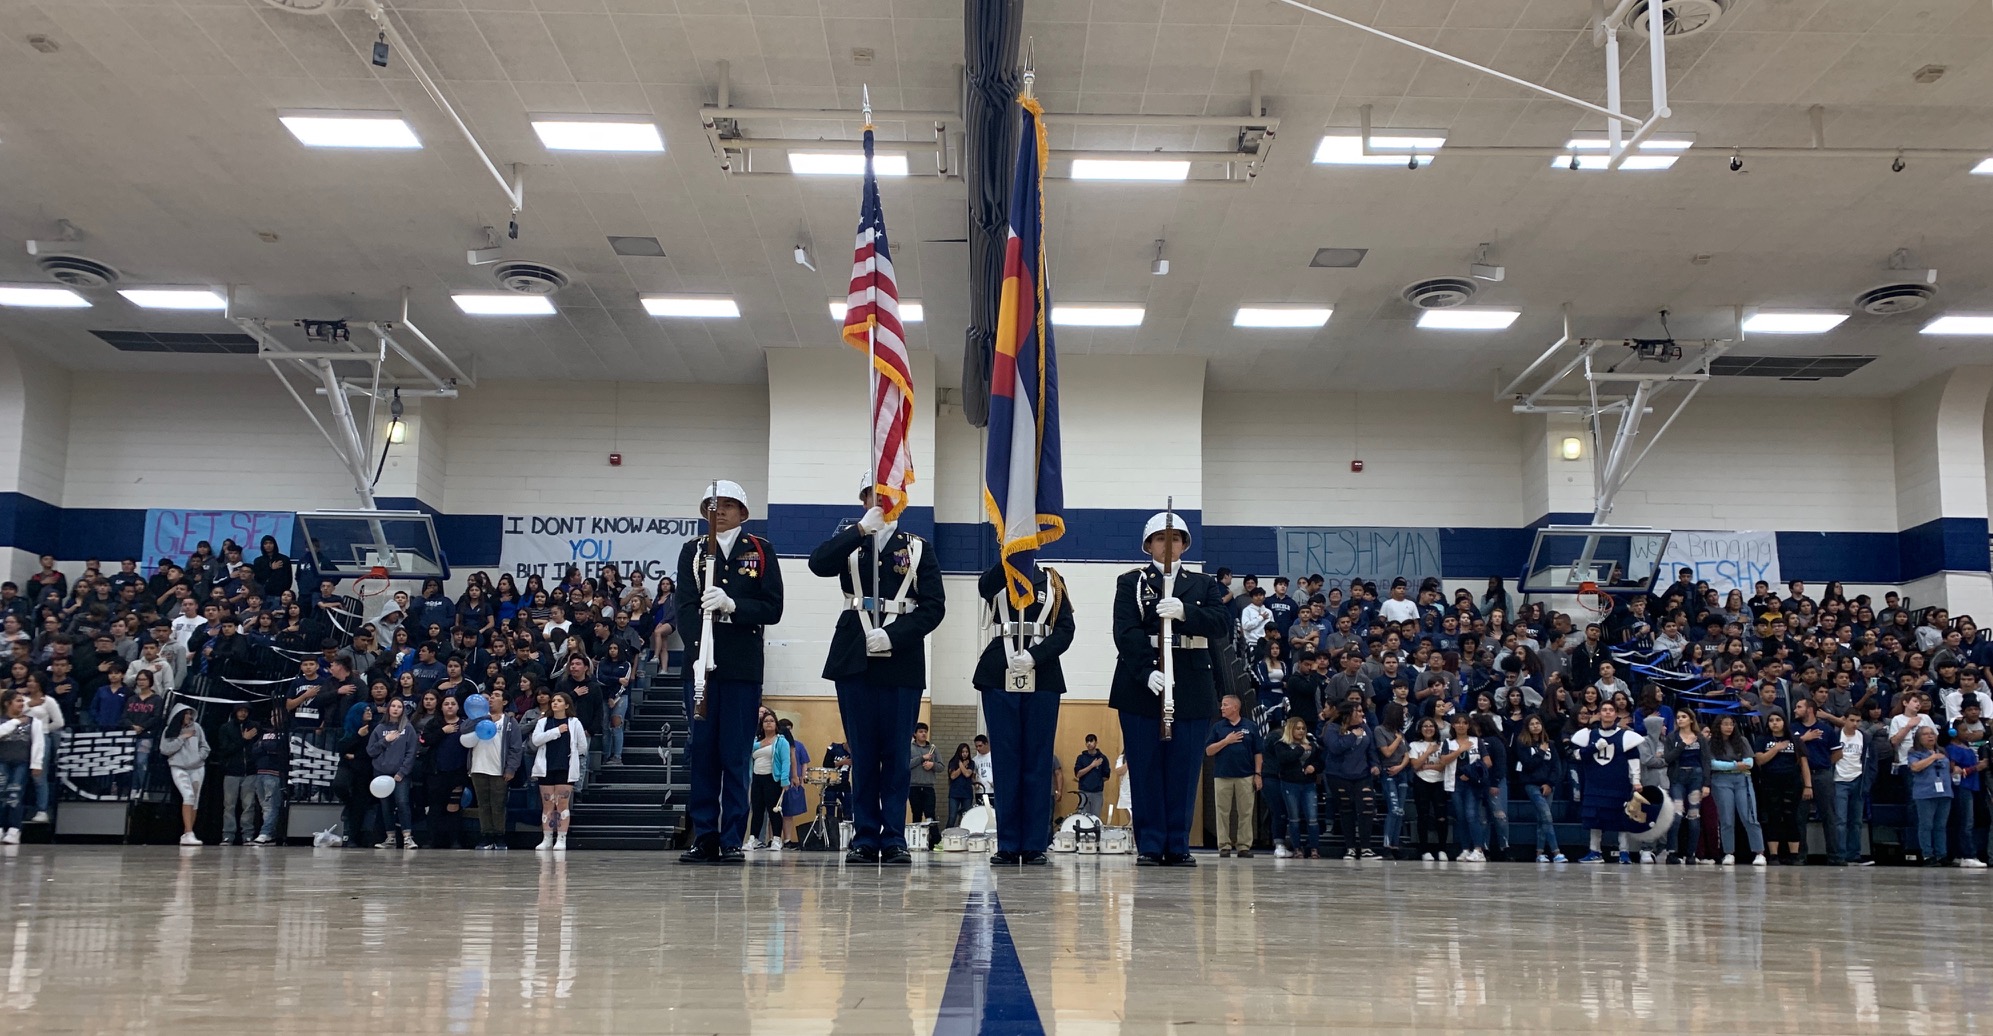 The Official home of the Lincoln Lancer JROTC Abraham Lincoln High School